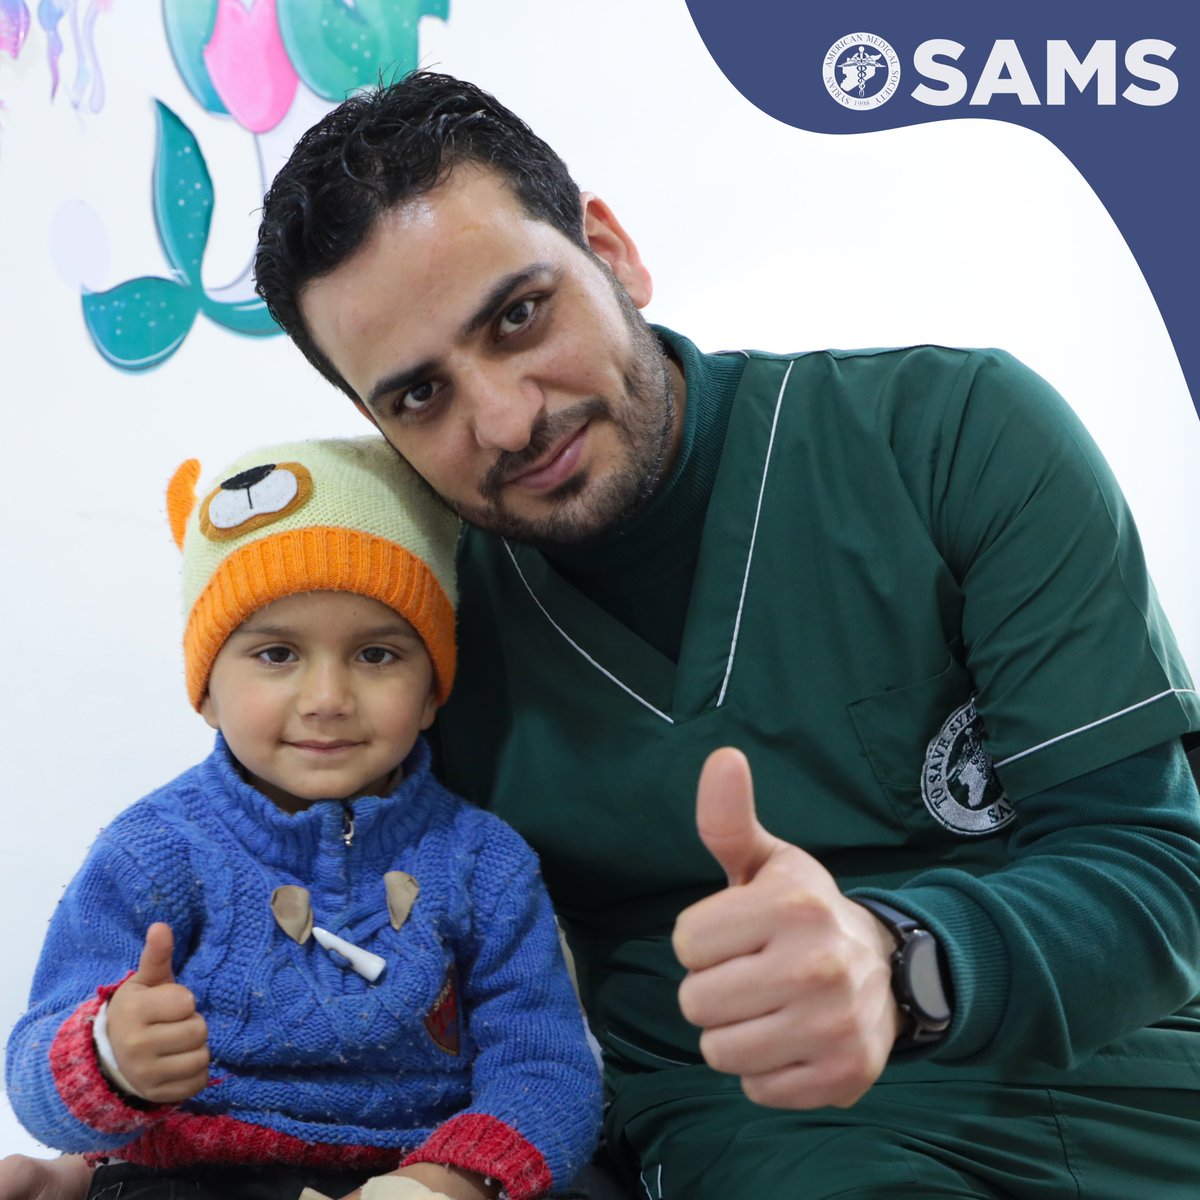 'Youssef's #cancer diagnosis shook us to the core. Thanks to #SAMS, his treatment began promptly. With God’s grace, after 3 months, he's responding well to therapy.” - Abdul Muhaymen, Youssef’s Father #Syria #Healthcare